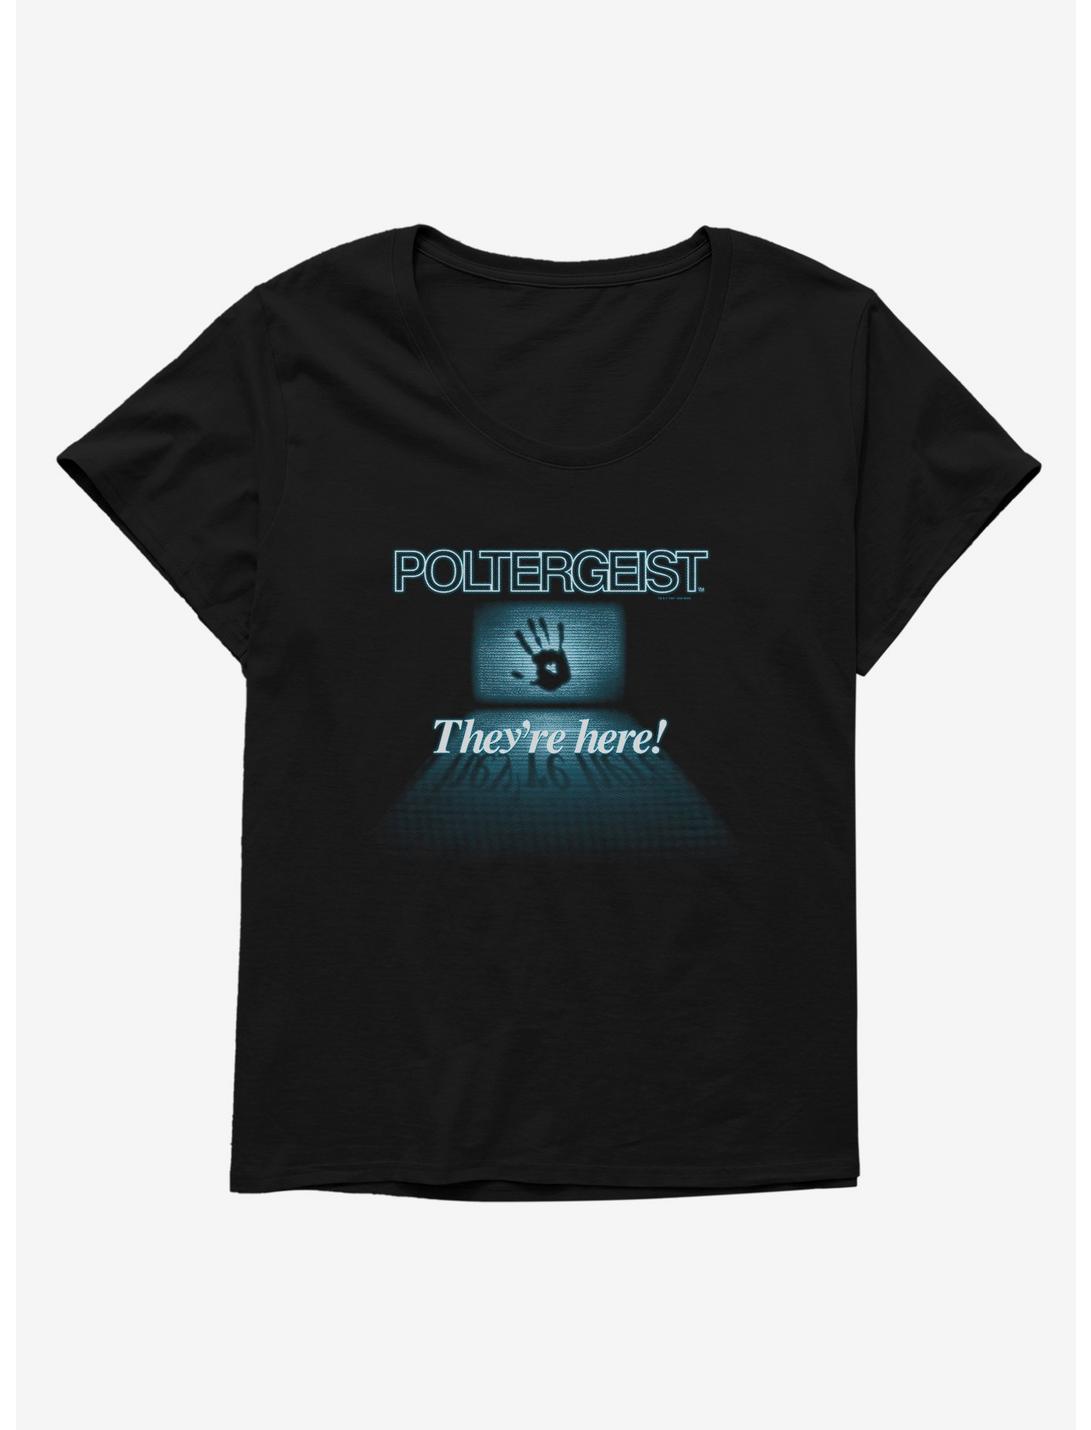 Poltergeist They're Here! Womens T-Shirt Plus Size, BLACK, hi-res